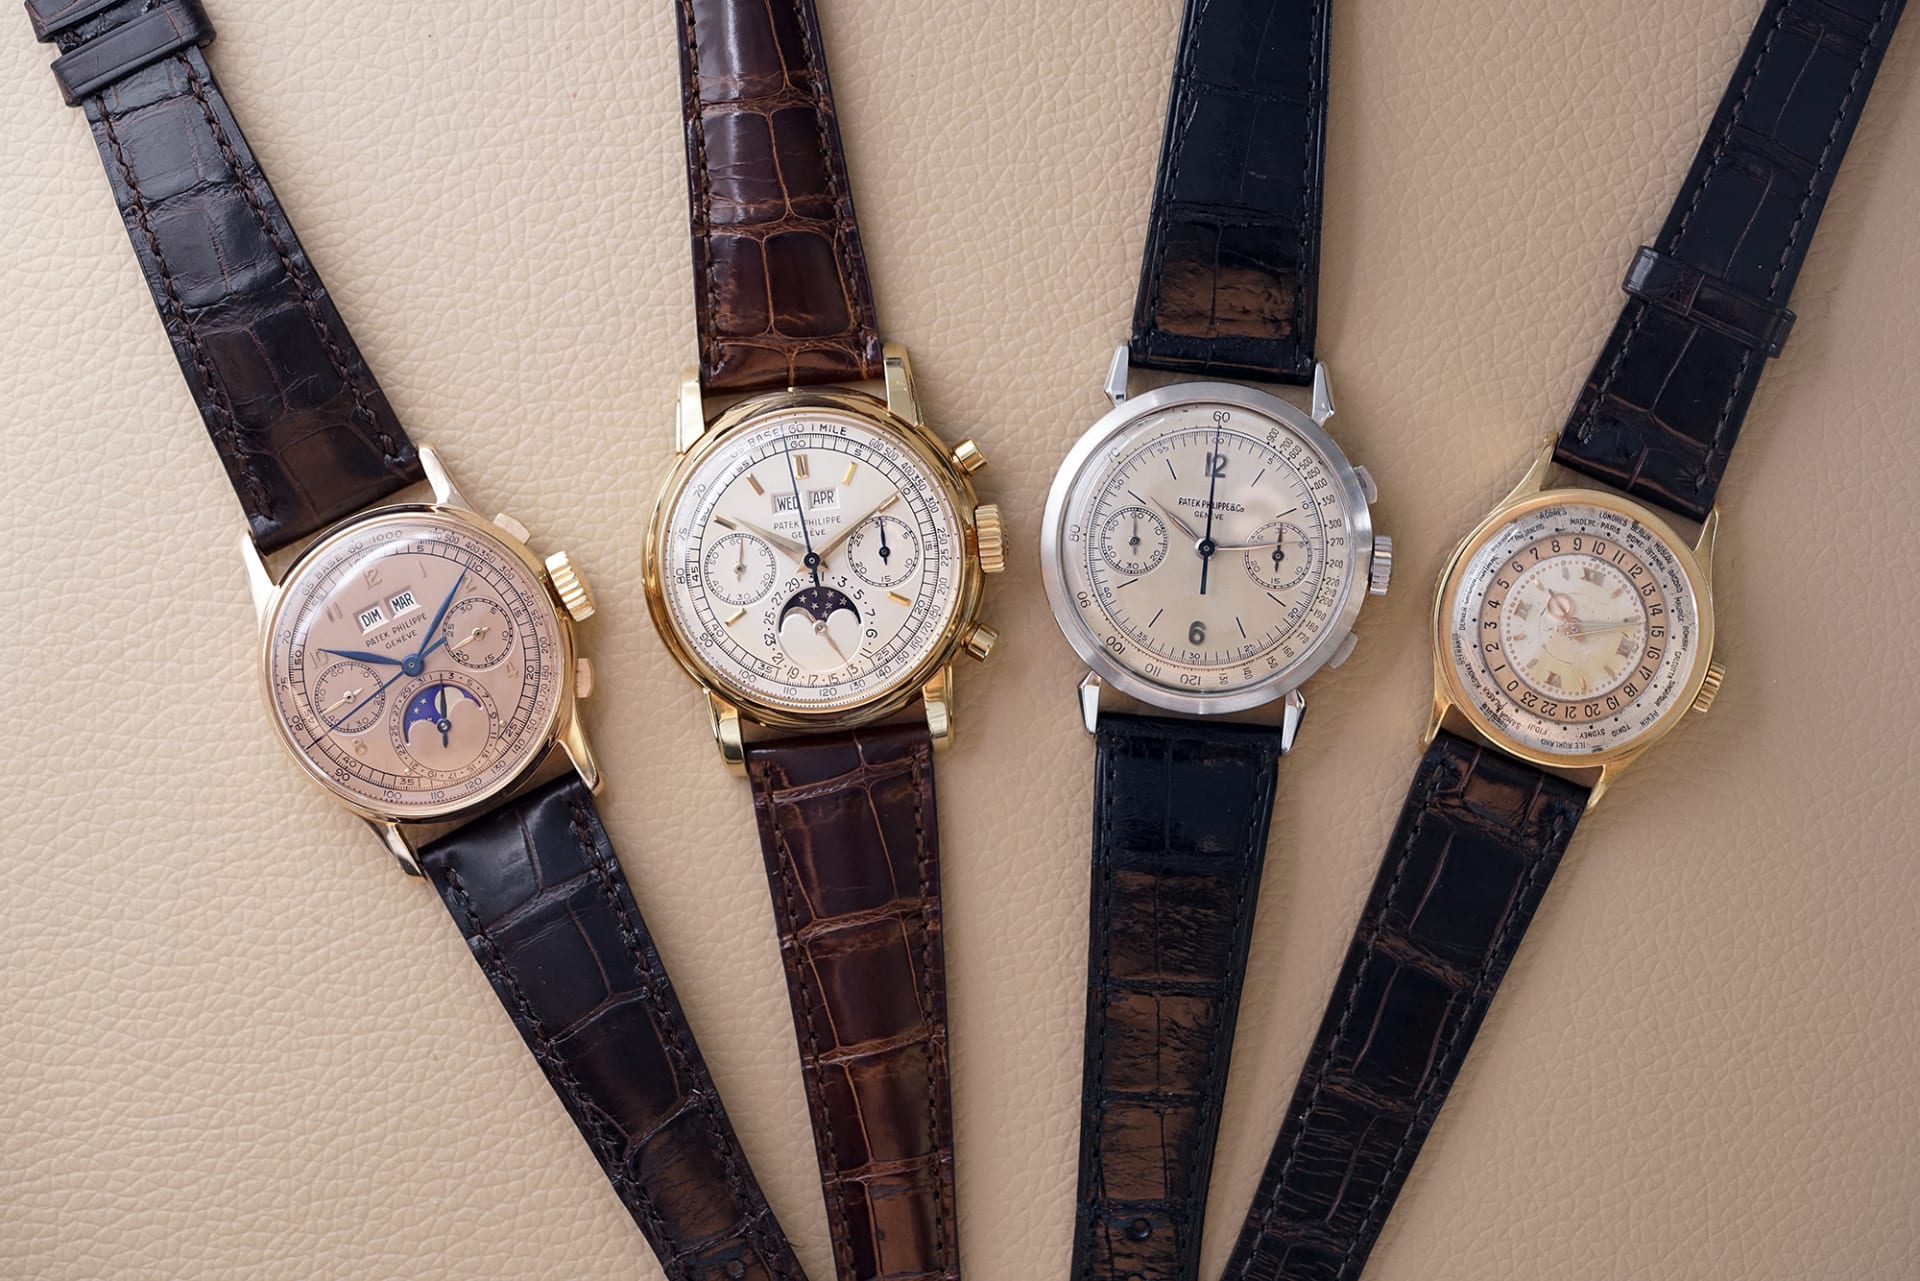 Jean claude biver patek philippe collection 1518 2499 1579 and 96hu